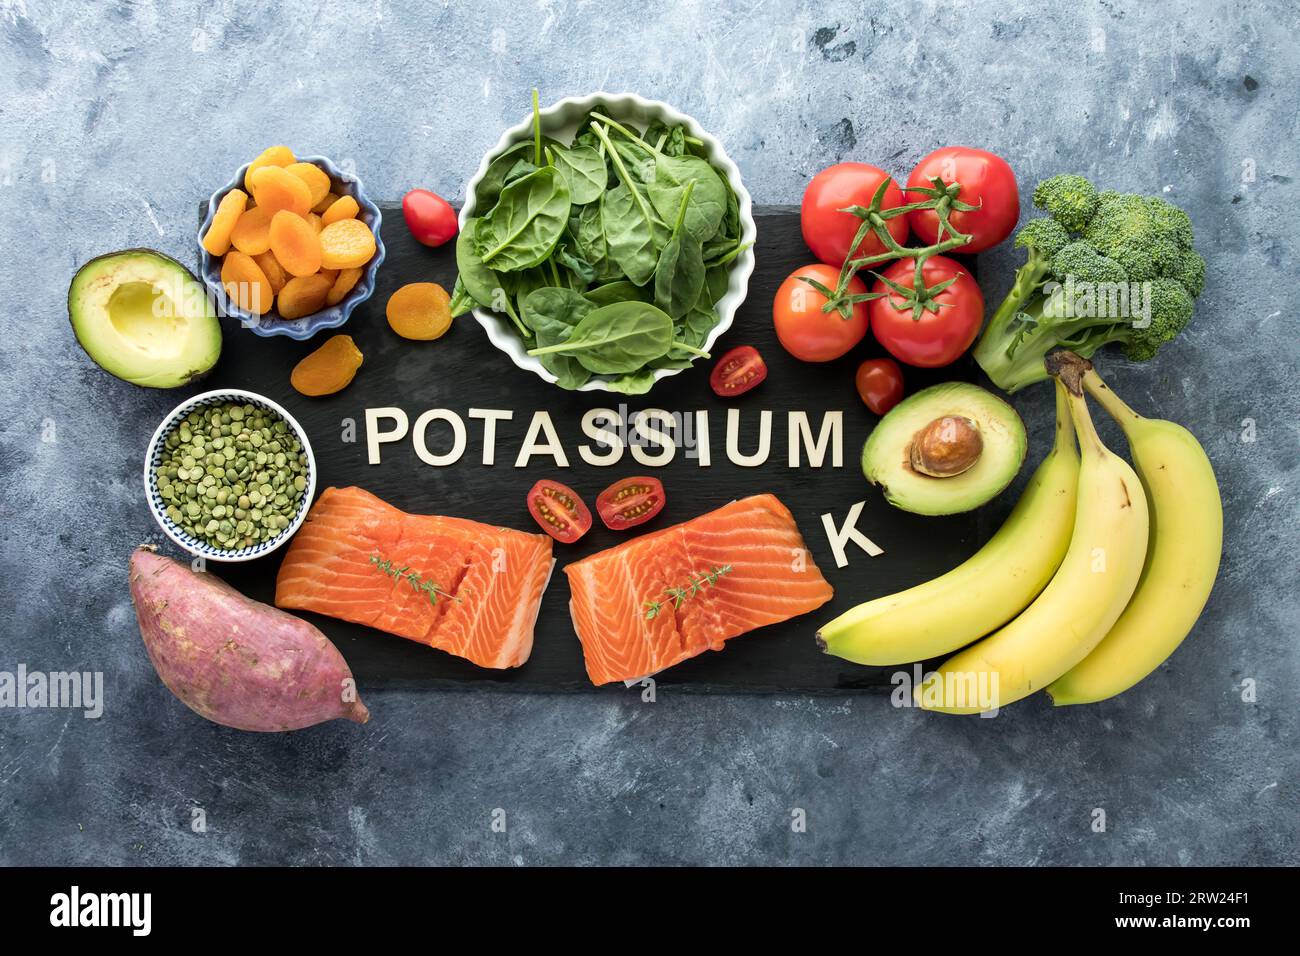 An assortment of foods high in potassium with the chemical element symbol K. Stock Photo